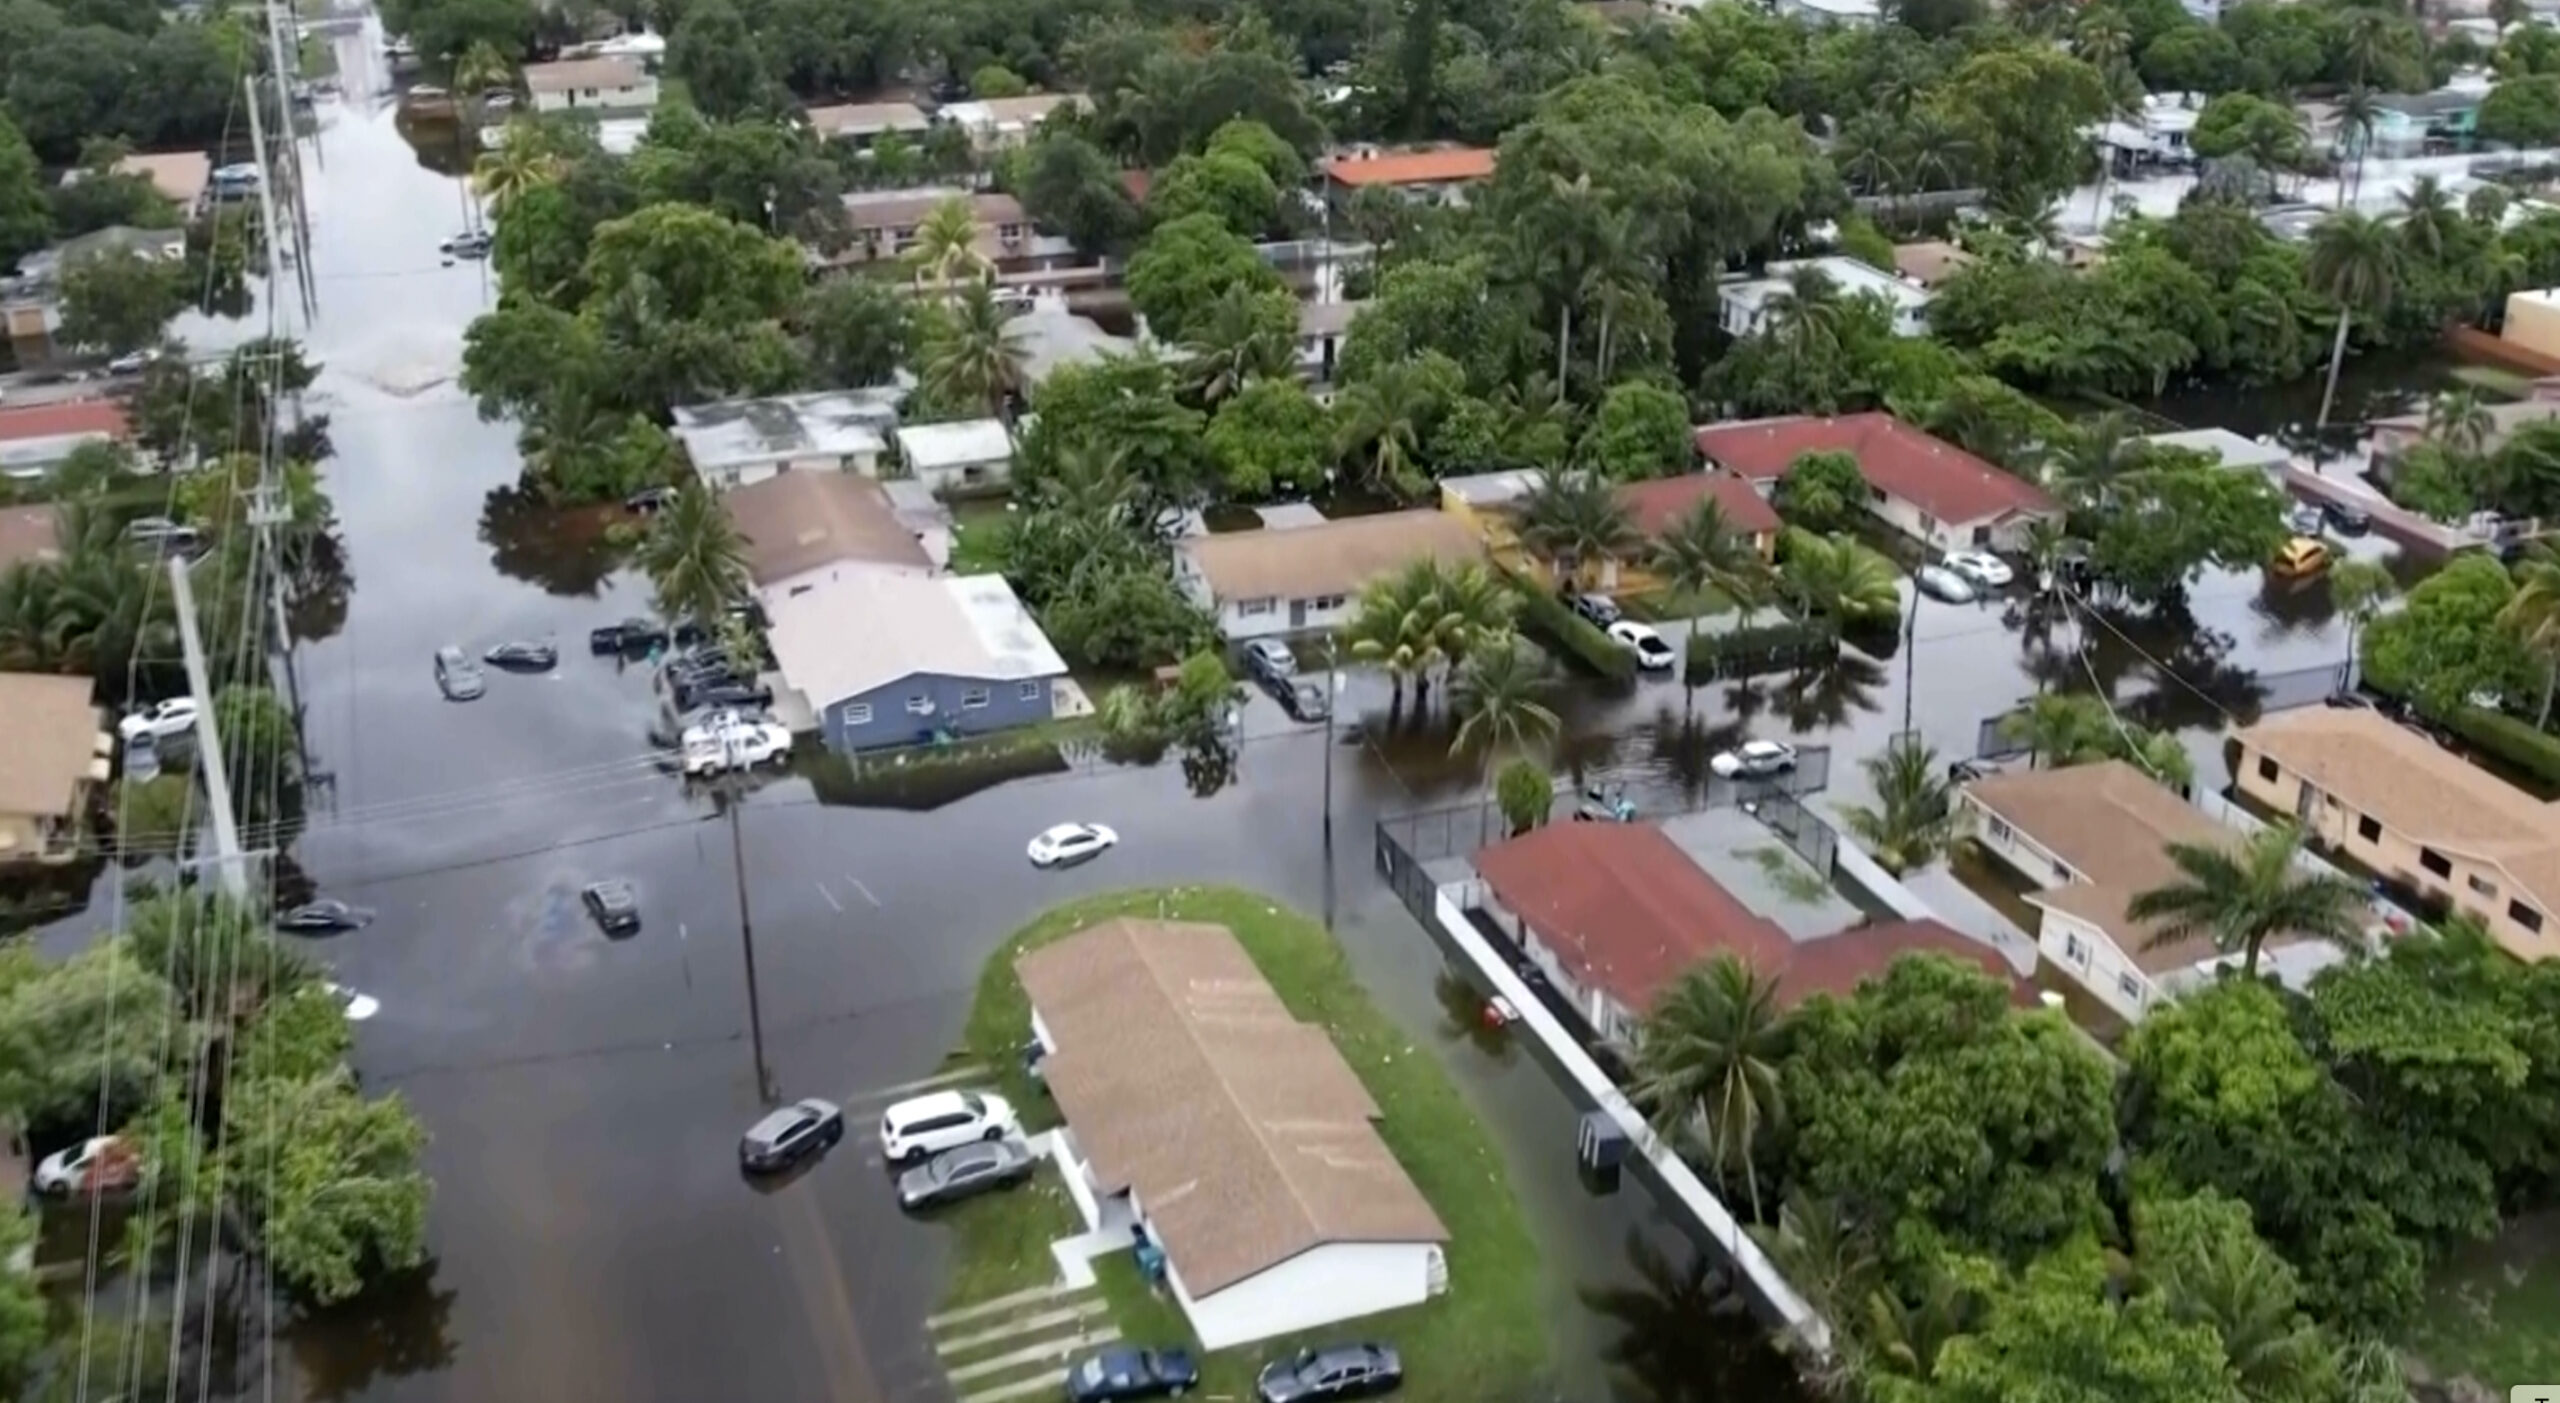 Cars were seen floating around Miami due to the massive flood that started on Tuesday